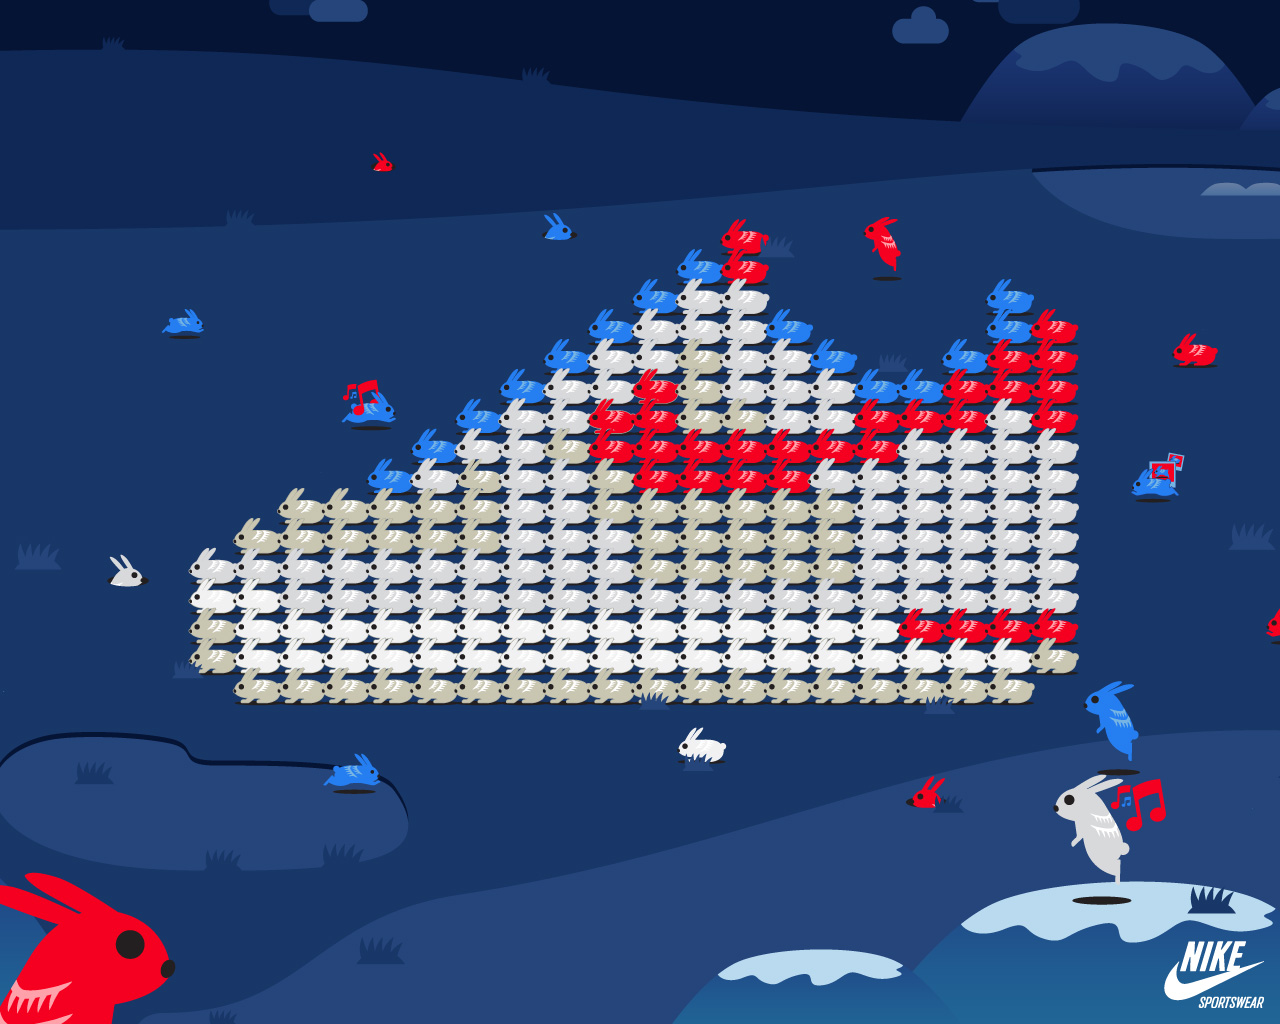 Nike Air Force 1 'Year of the Rabbit' Wallpaper